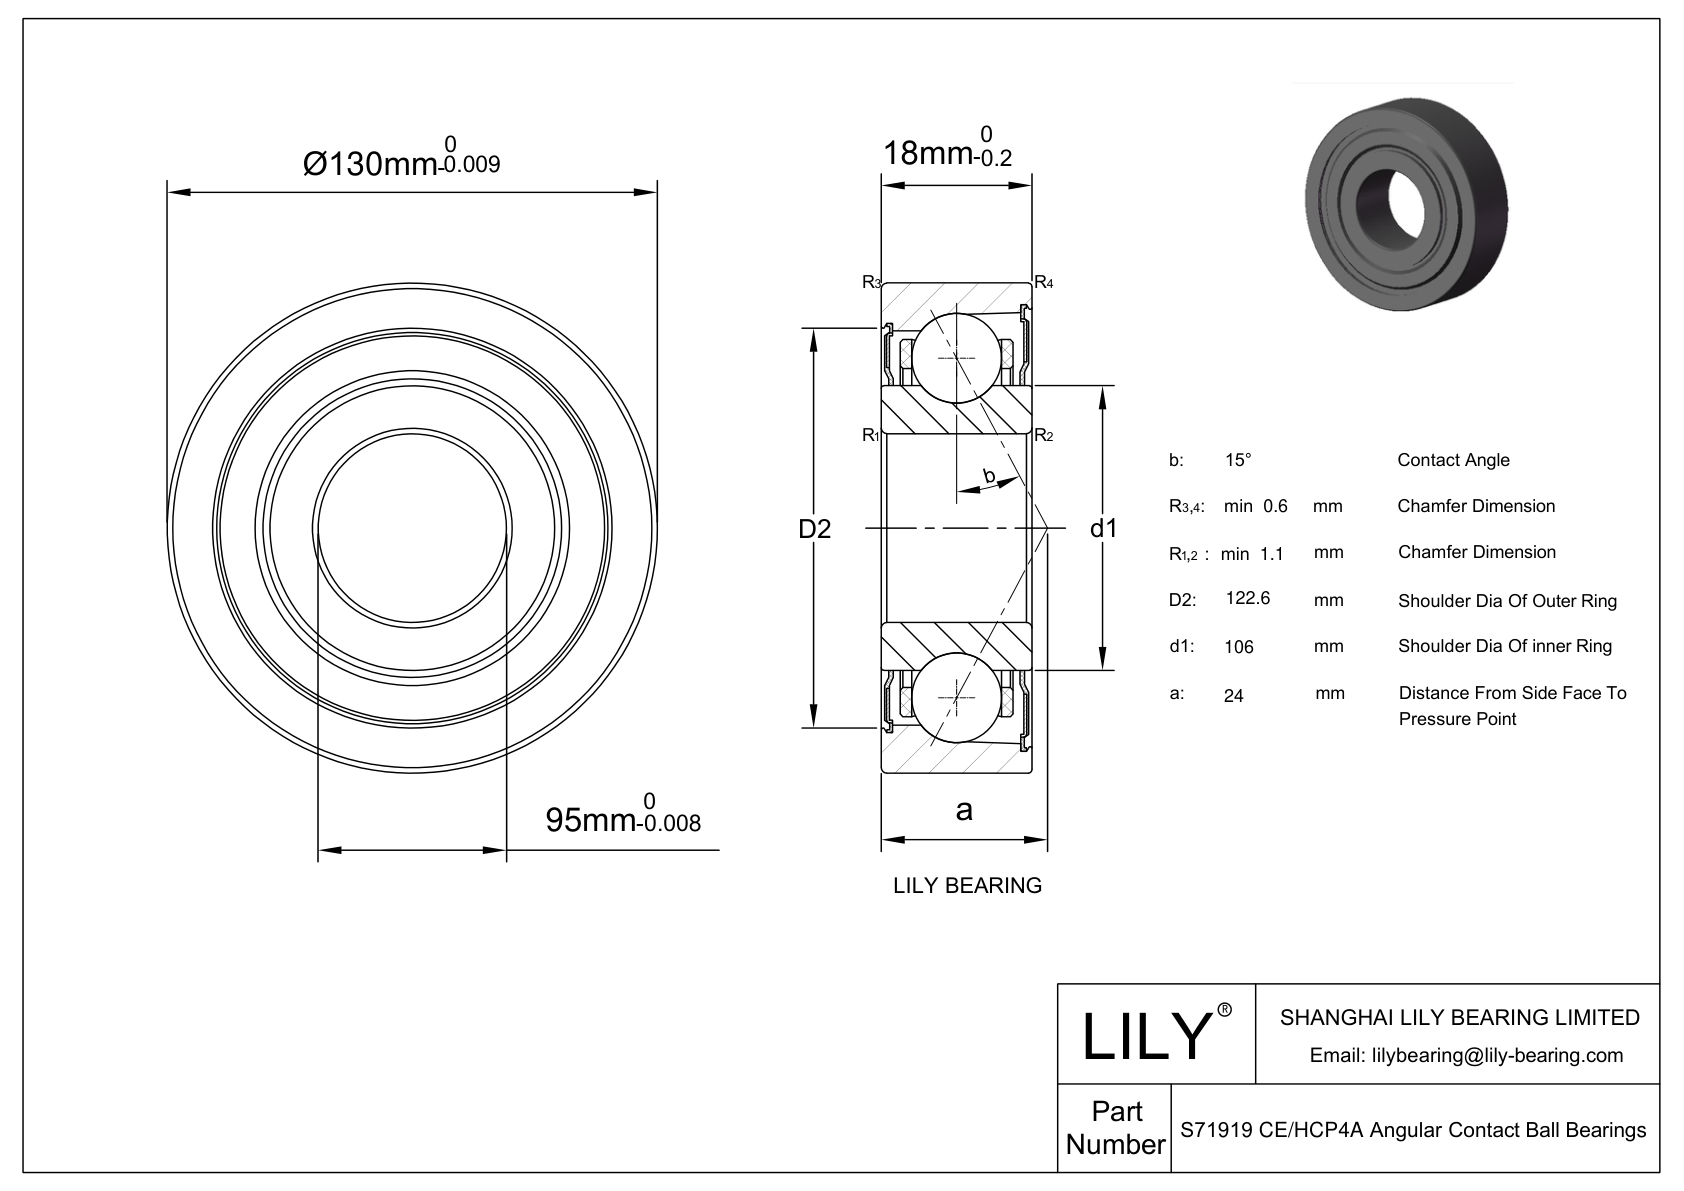 S71919 CE/HCP4A Super Precision Angular Contact Ball Bearings cad drawing